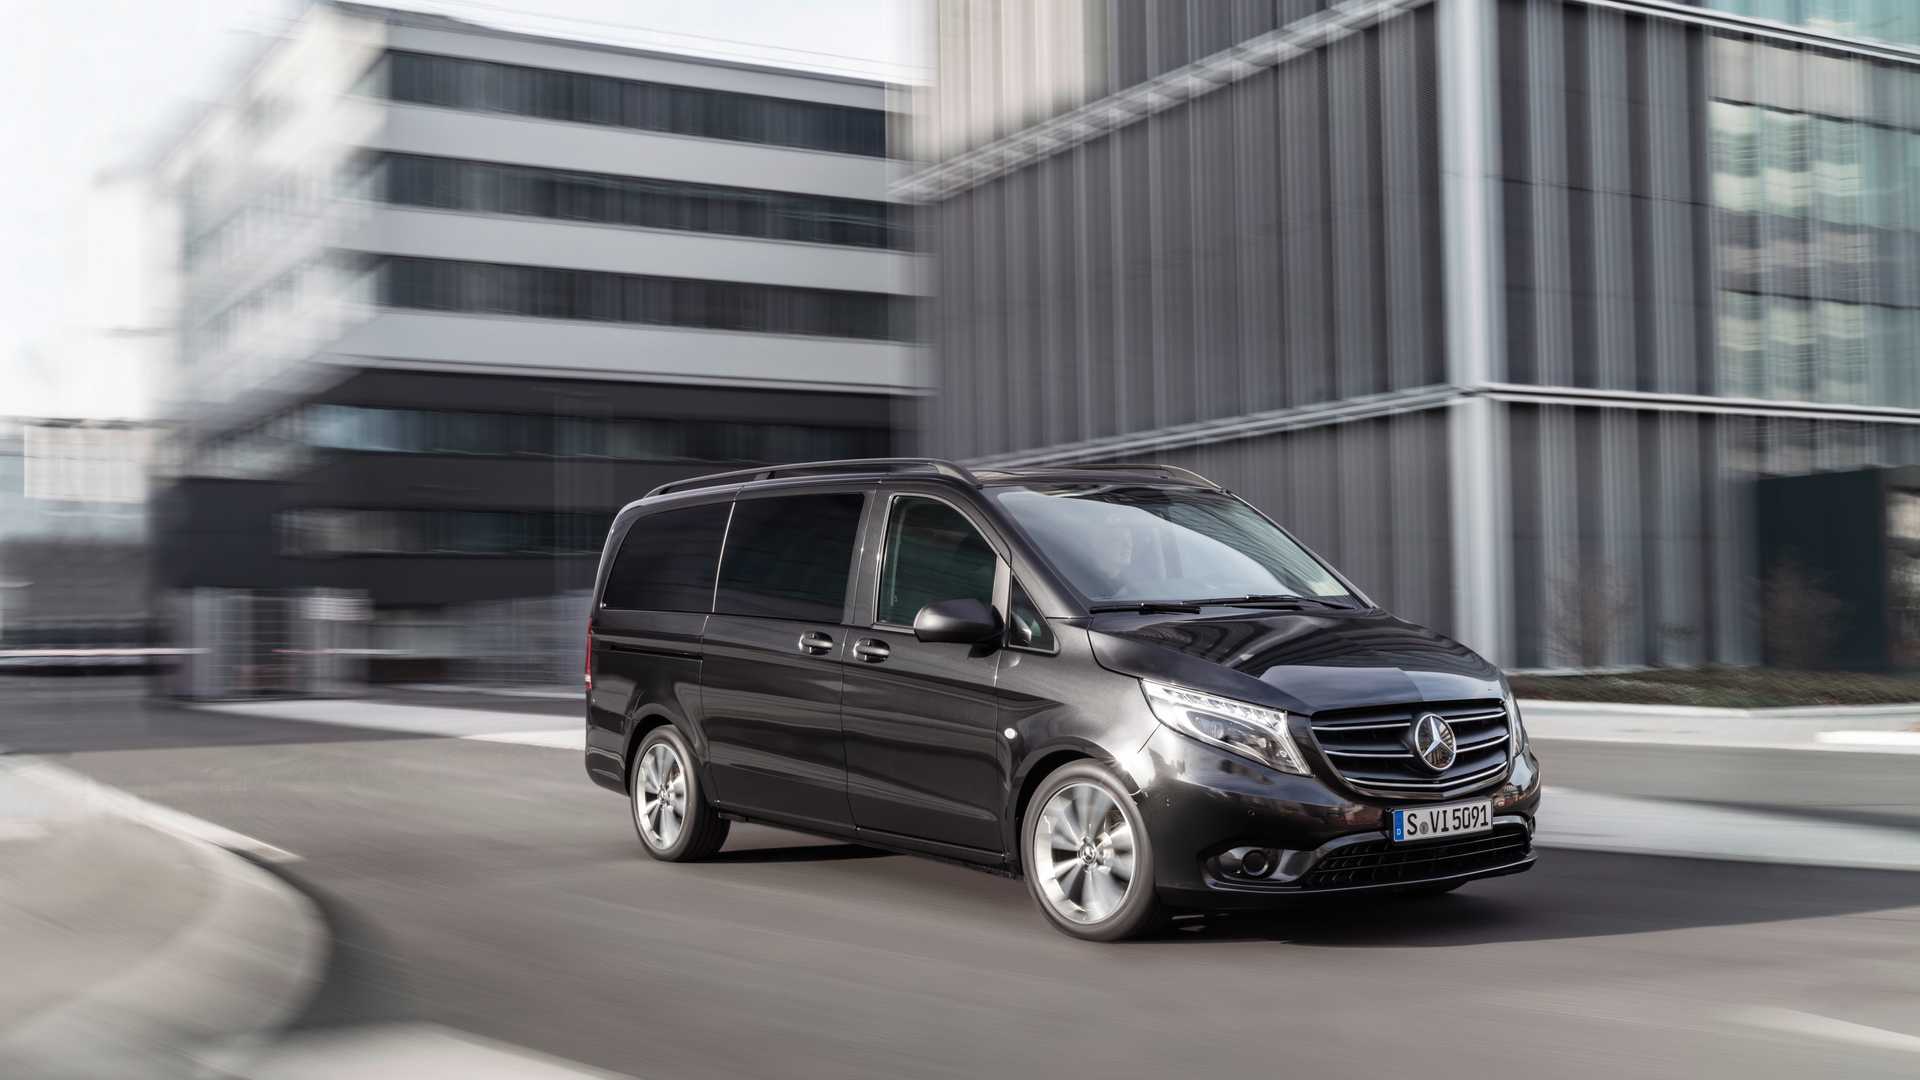 Mercedes-Benz Vito receives an update internally and externally with refreshing design, features, safety and technology that meets customers demands